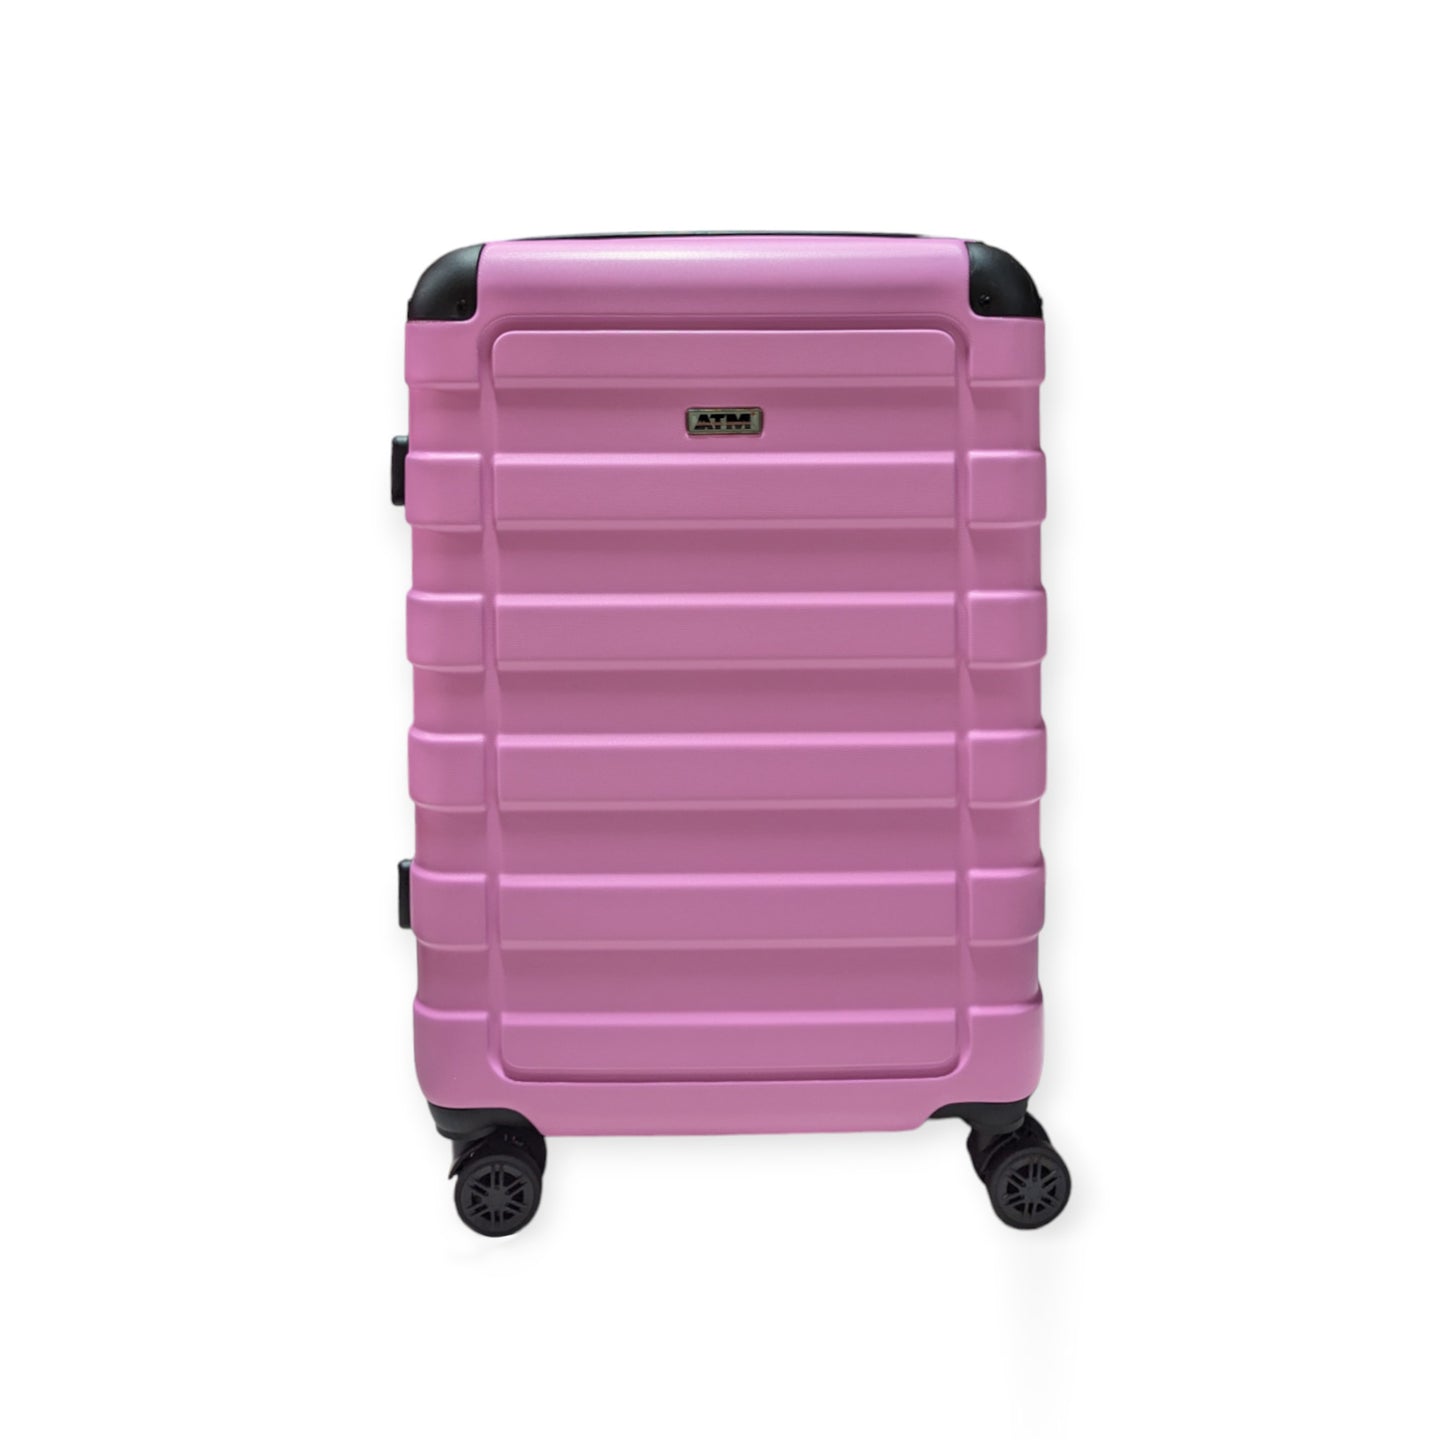 Classic Collection Pink Luggage 3 Piece Set (20/26/30") Suitcase Lock Spinner